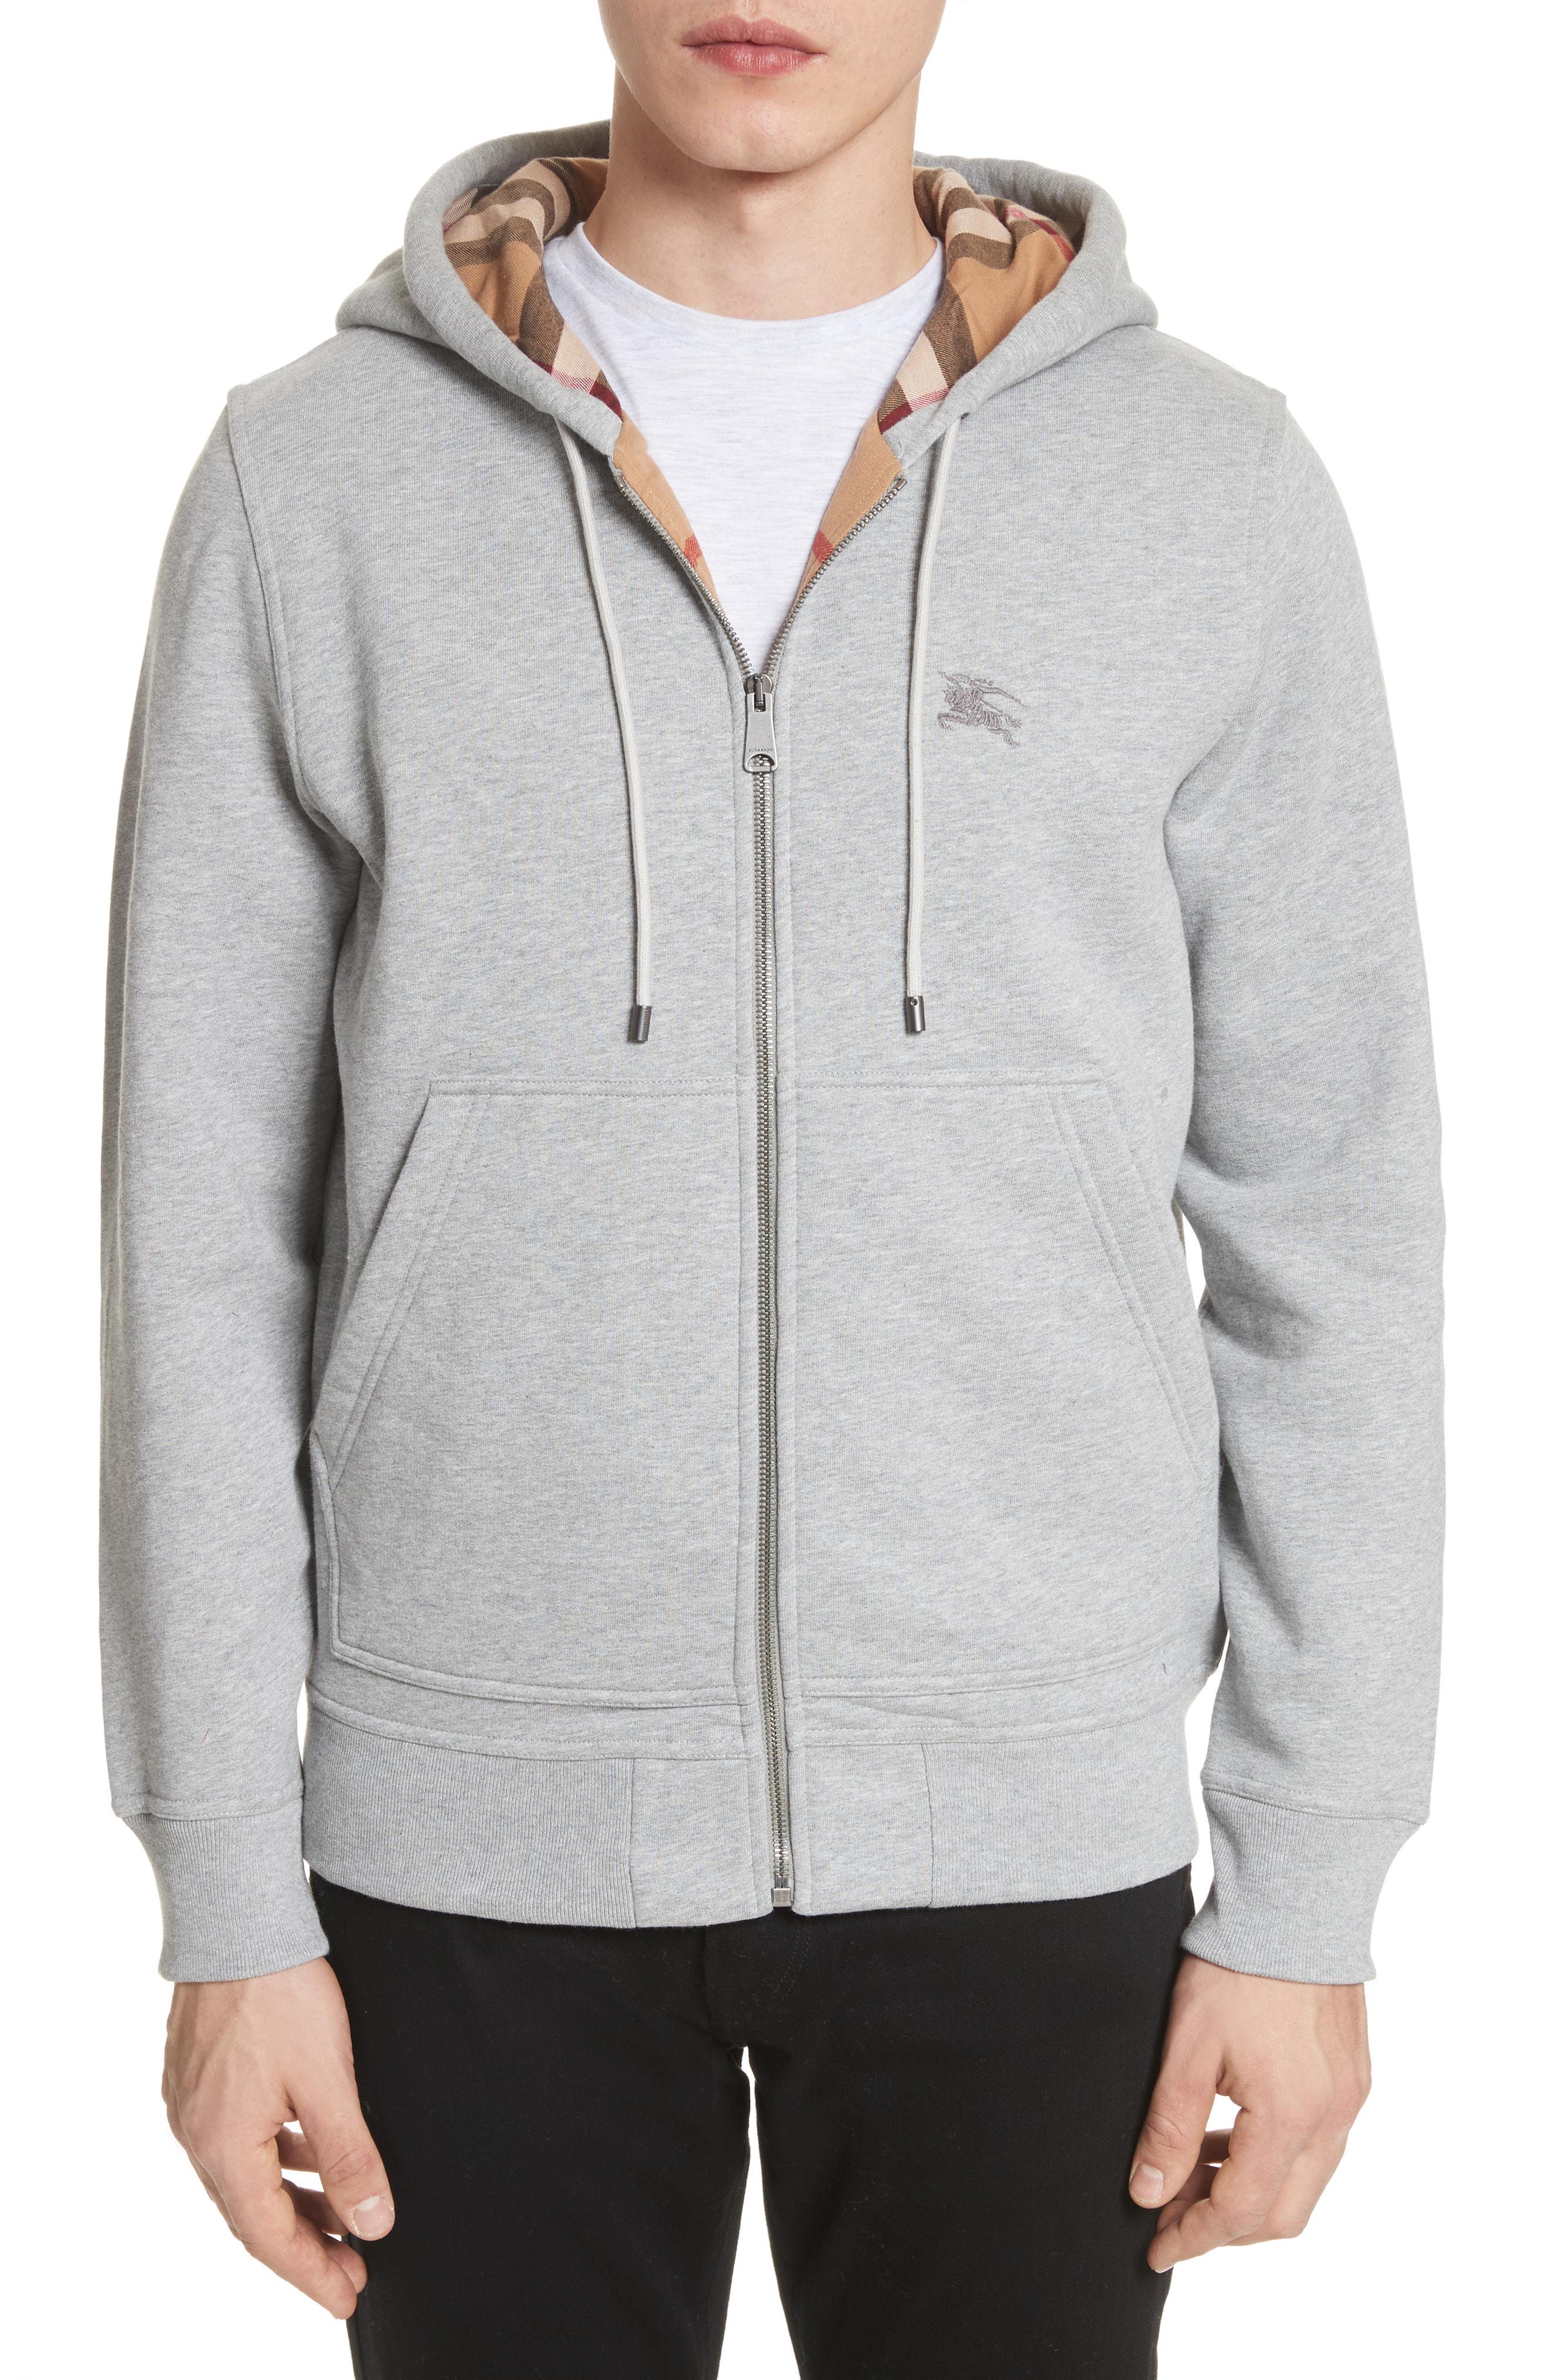 burberry hoodie mens grey Online Shopping for Women, Men, Kids Fashion &  Lifestyle|Free Delivery & Returns! -